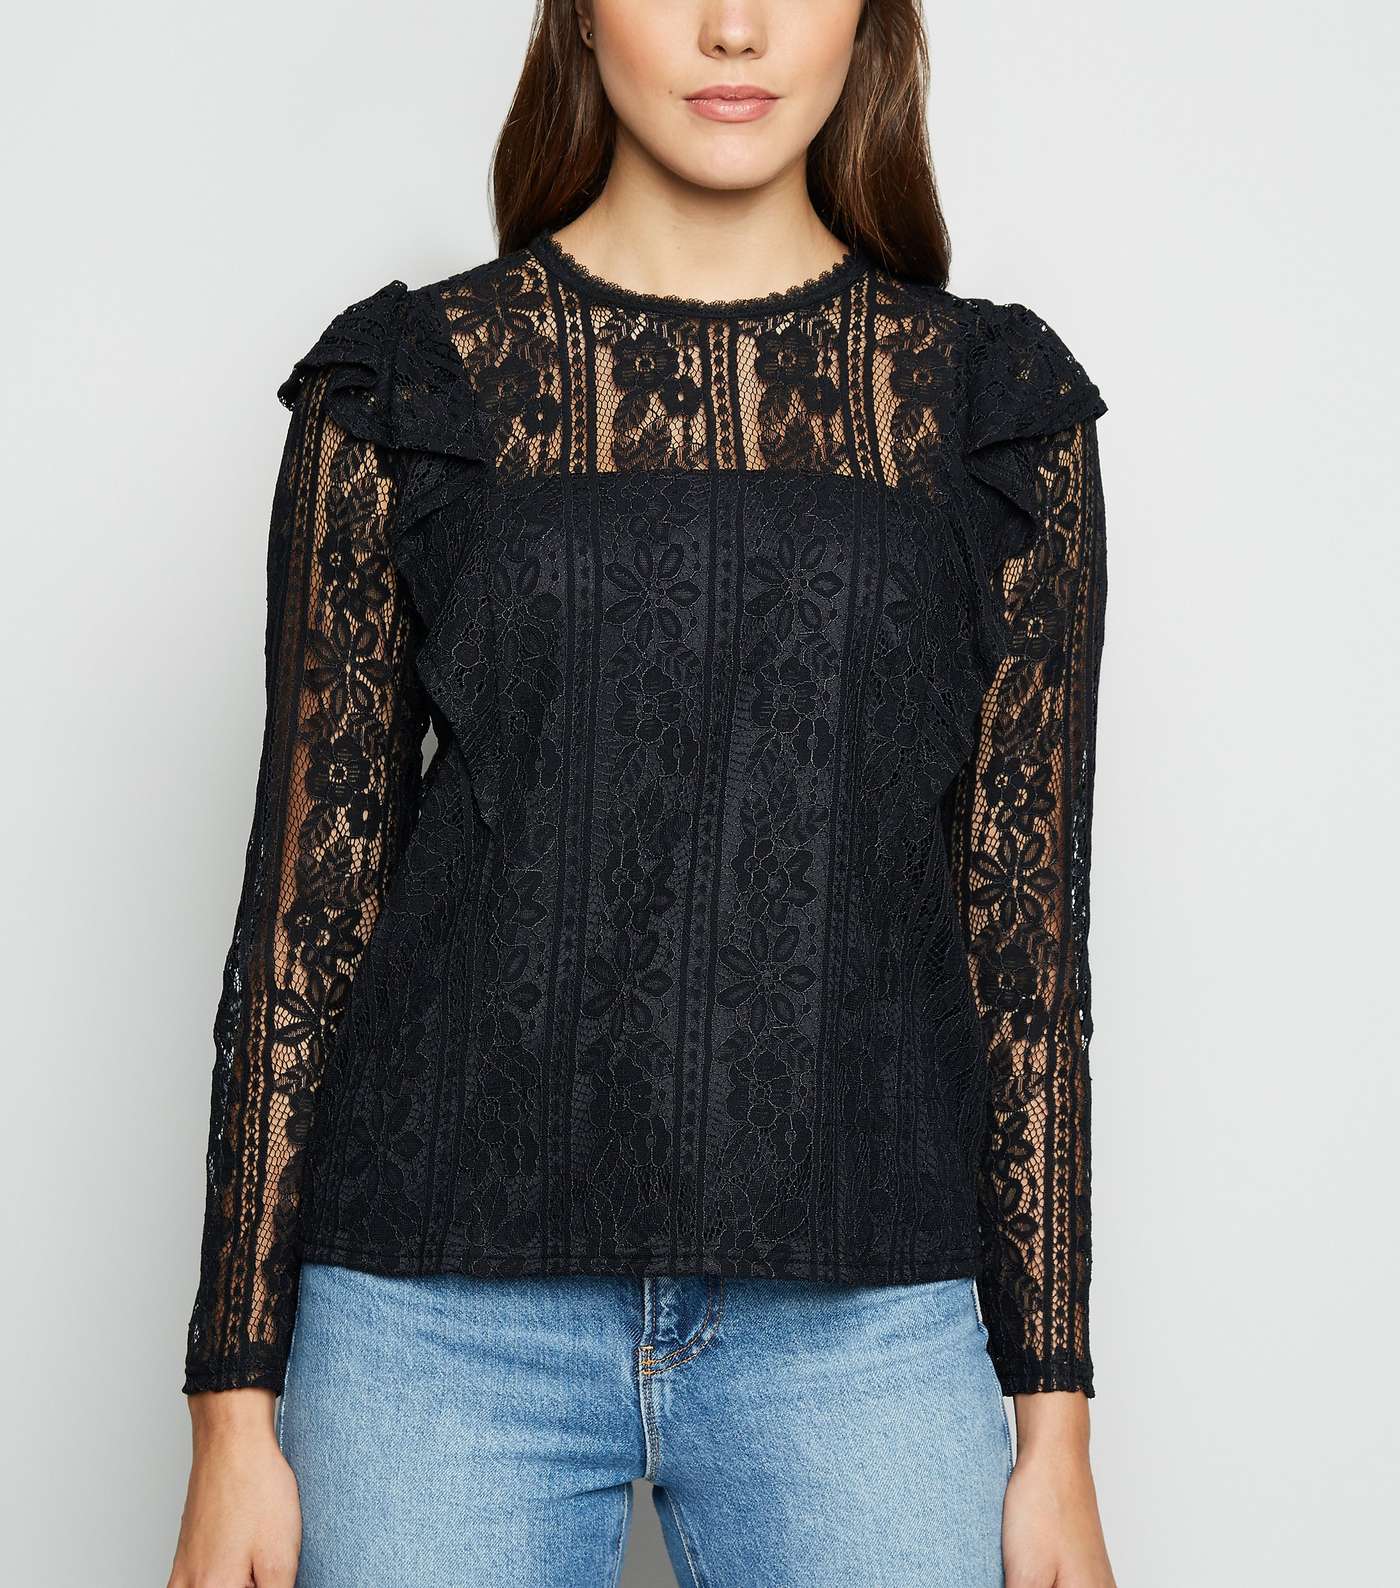 Black Lace Long Sleeve Frill Trim Top